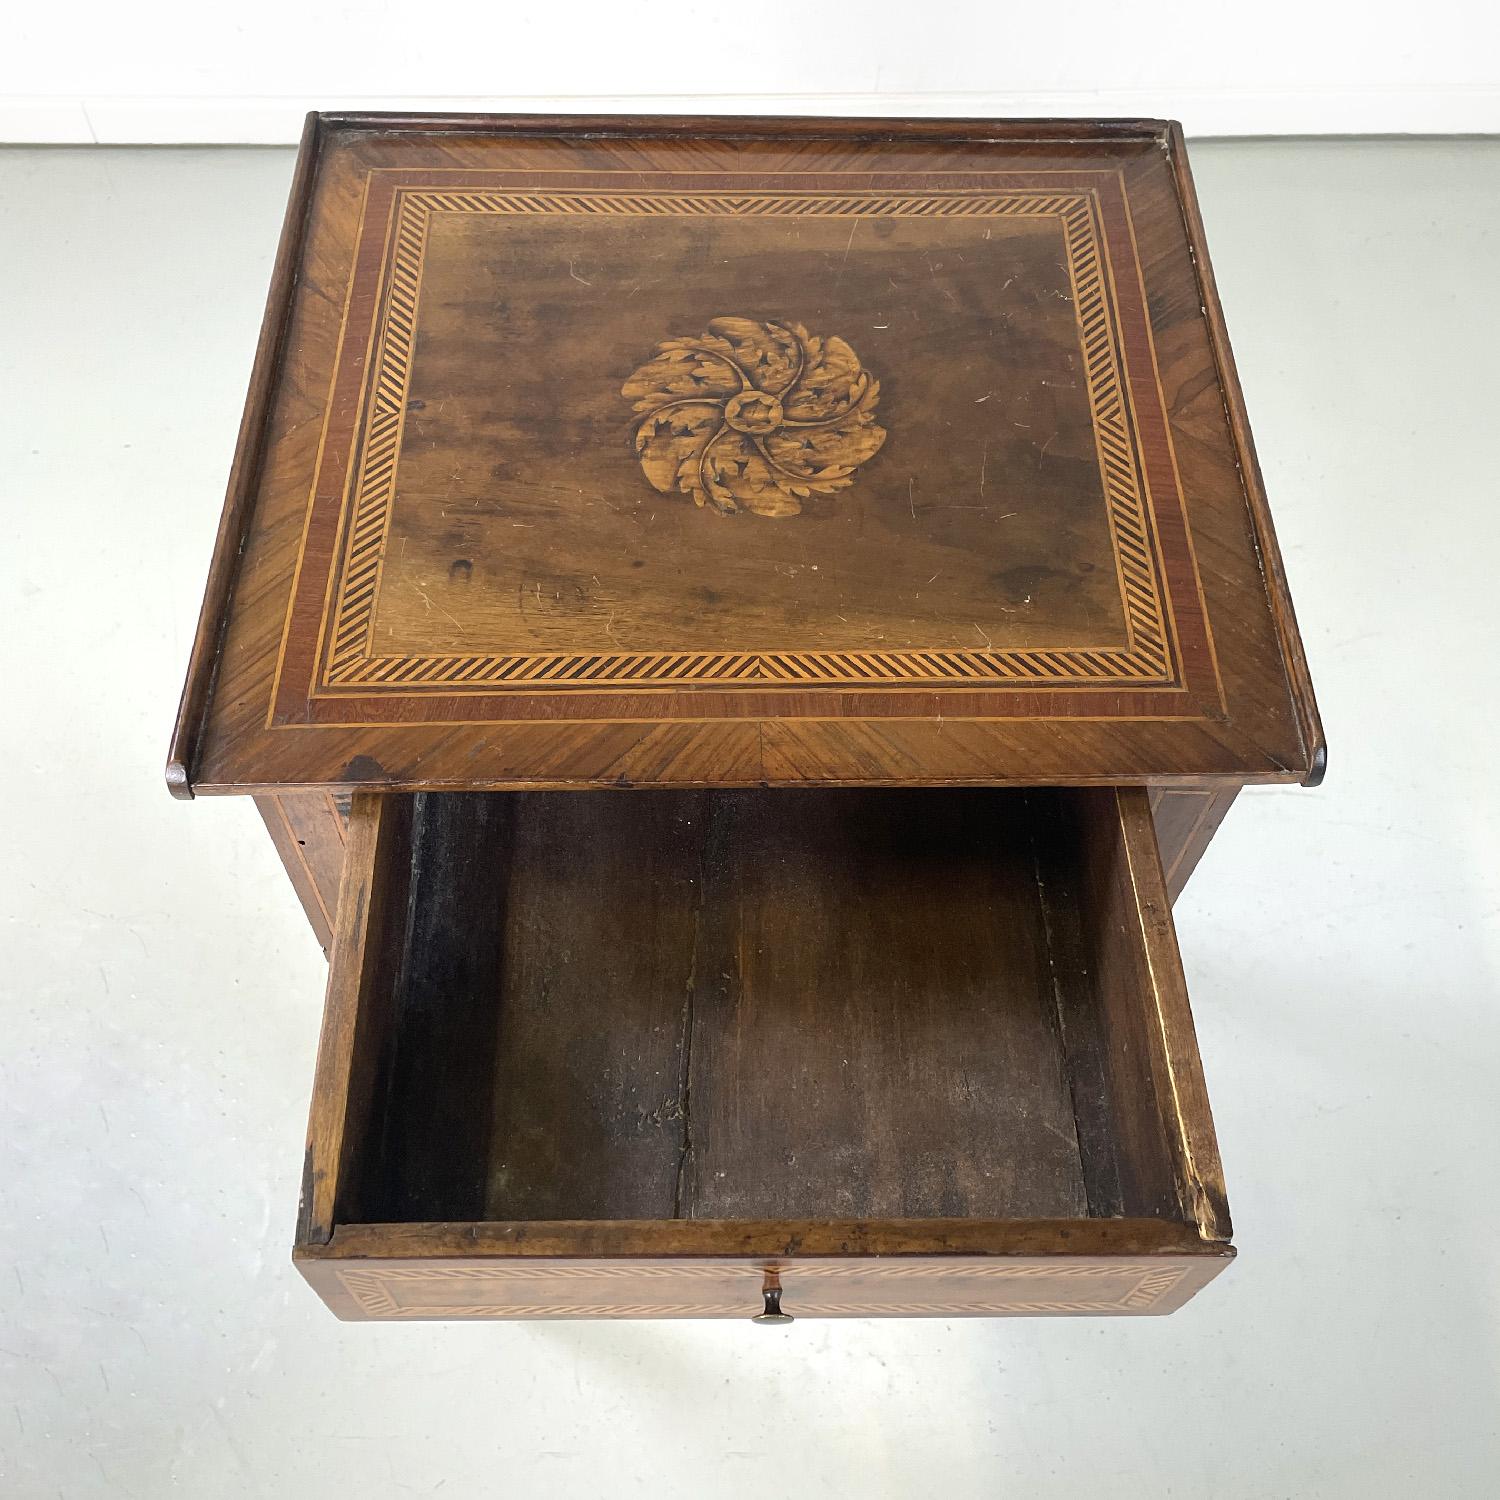 Italian antique wooden bedside tables with inlaid floral decorations, 1750s For Sale 3